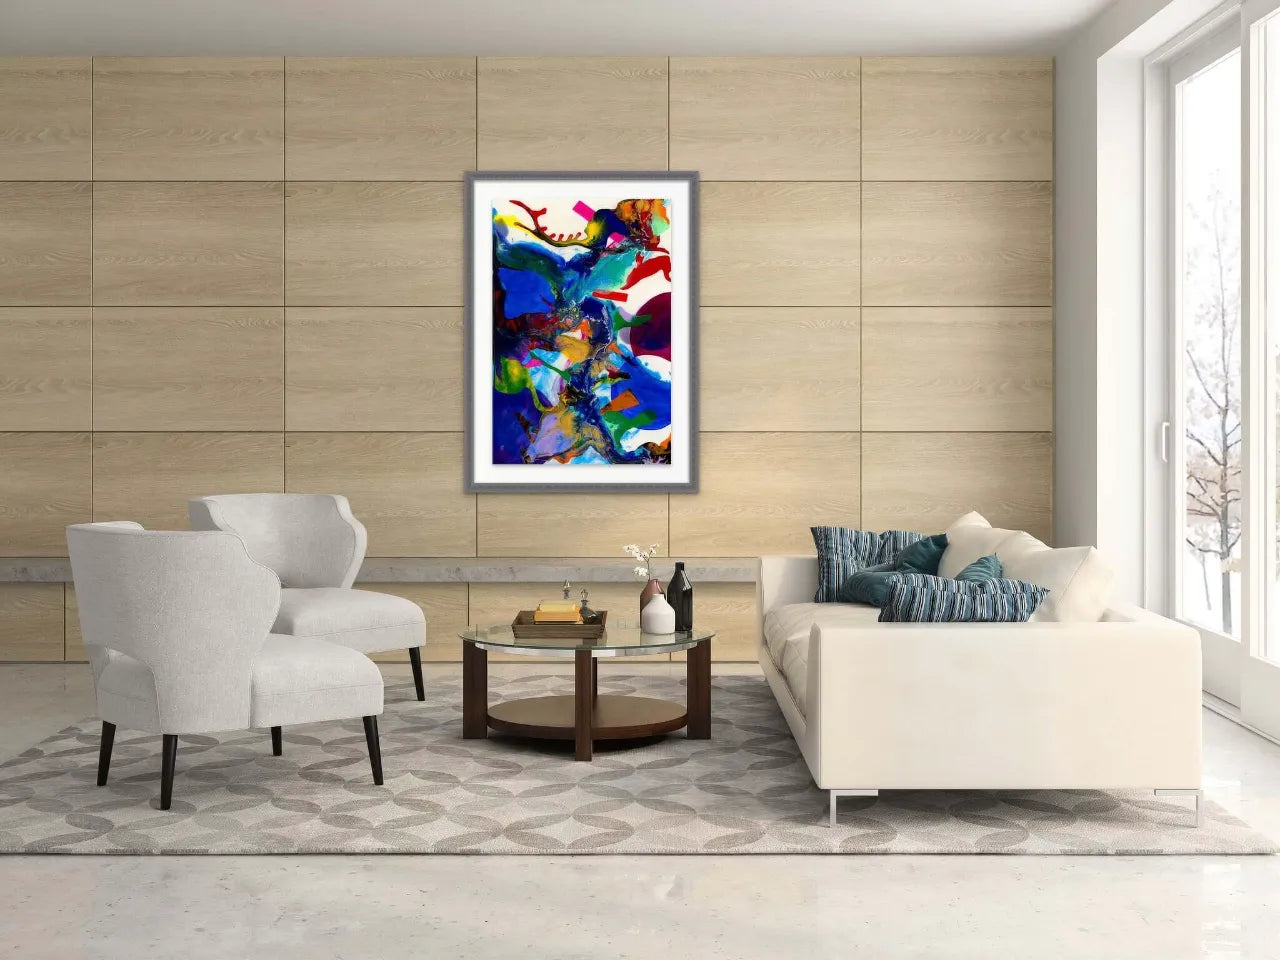    Abstract-Artwork-by-Sung-Lee-Movement-Inside-White-Lounge-Giclee-Limited-Edition-Print-